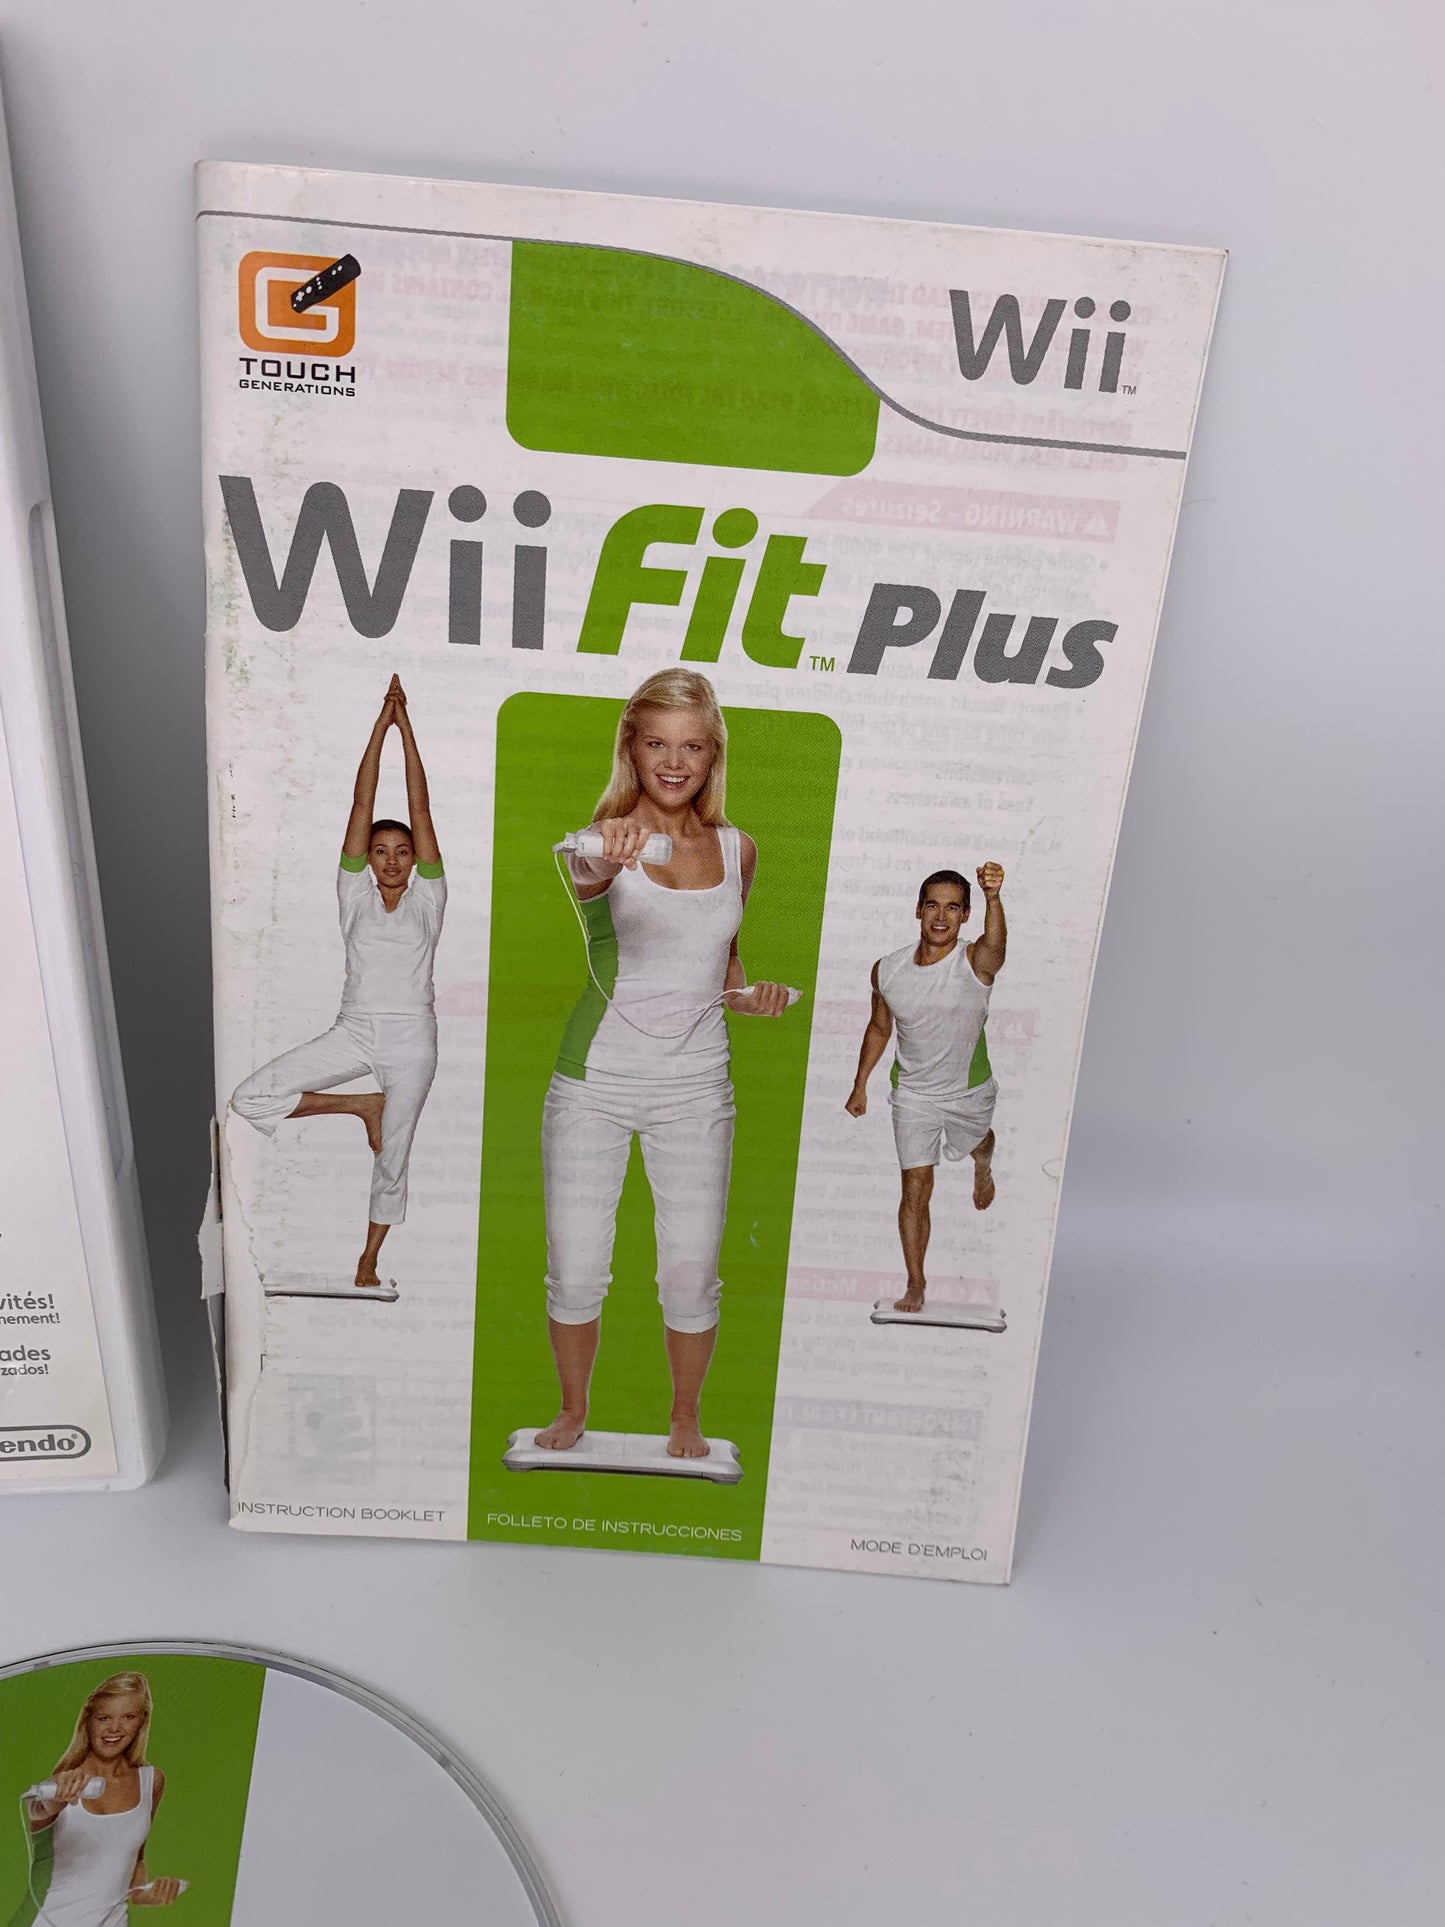 NiNTENDO Wii | WiiFiT PLUS | NOT FOR RESALE